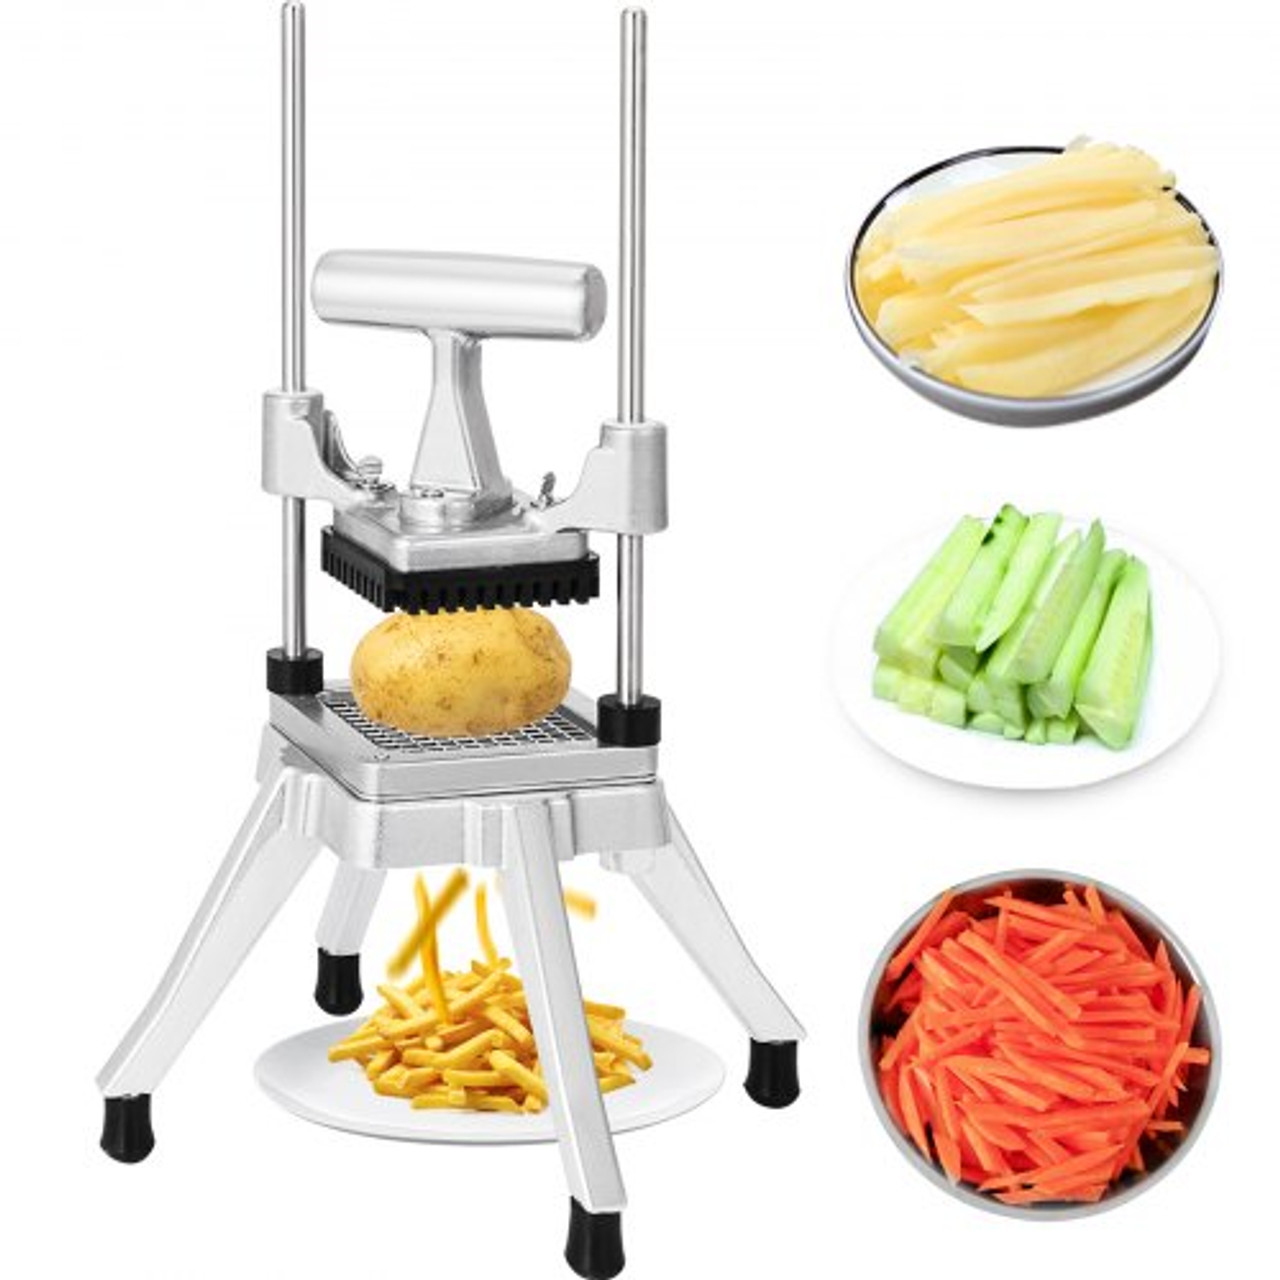 Commercial Vegetable Fruit Chopper 3/8? Blade Heavy Duty Professional Food Dicer Kattex French Fry Cutter Onion Slicer Stainless Steel for Tomato Peppers Potato Mushroom, Sliver